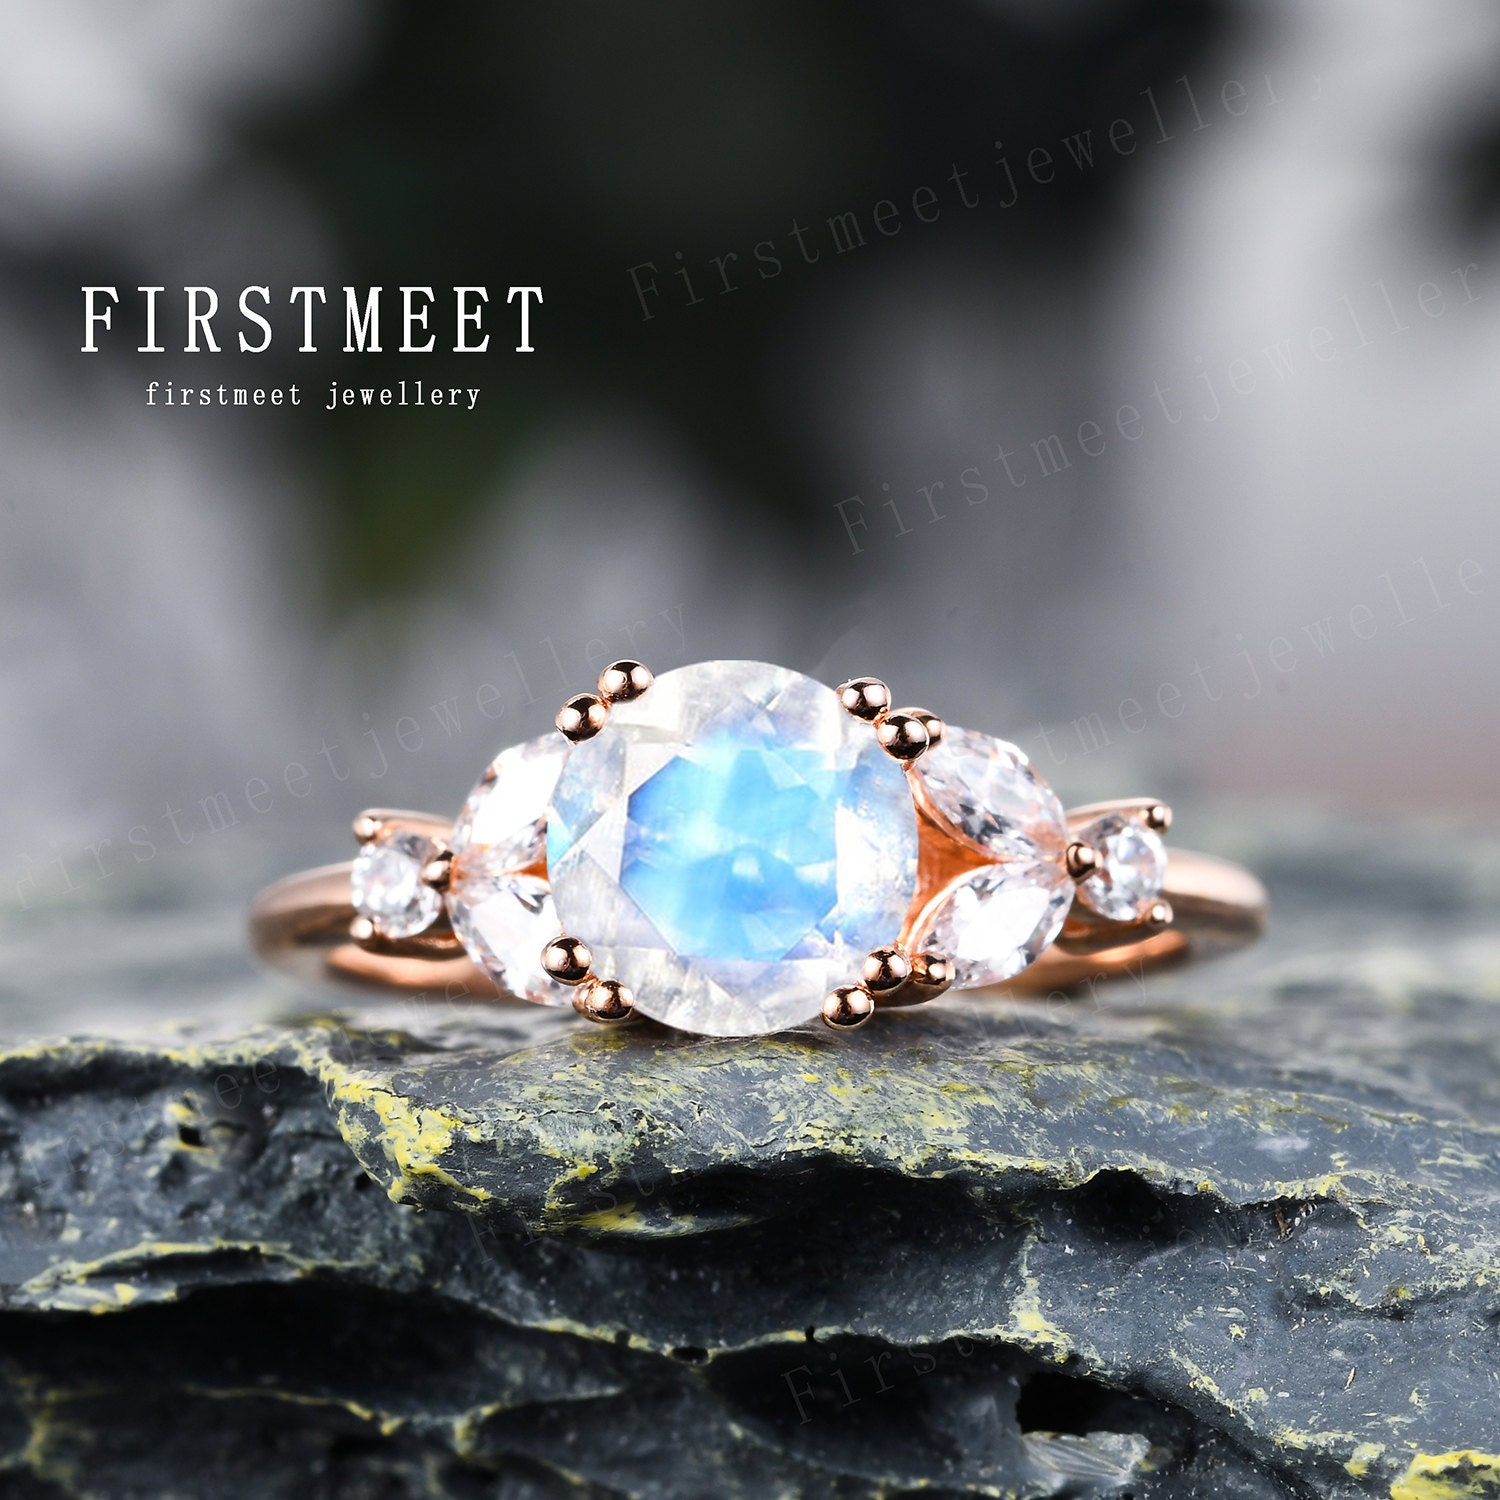 Buy Opal Ring Online In India - Etsy India